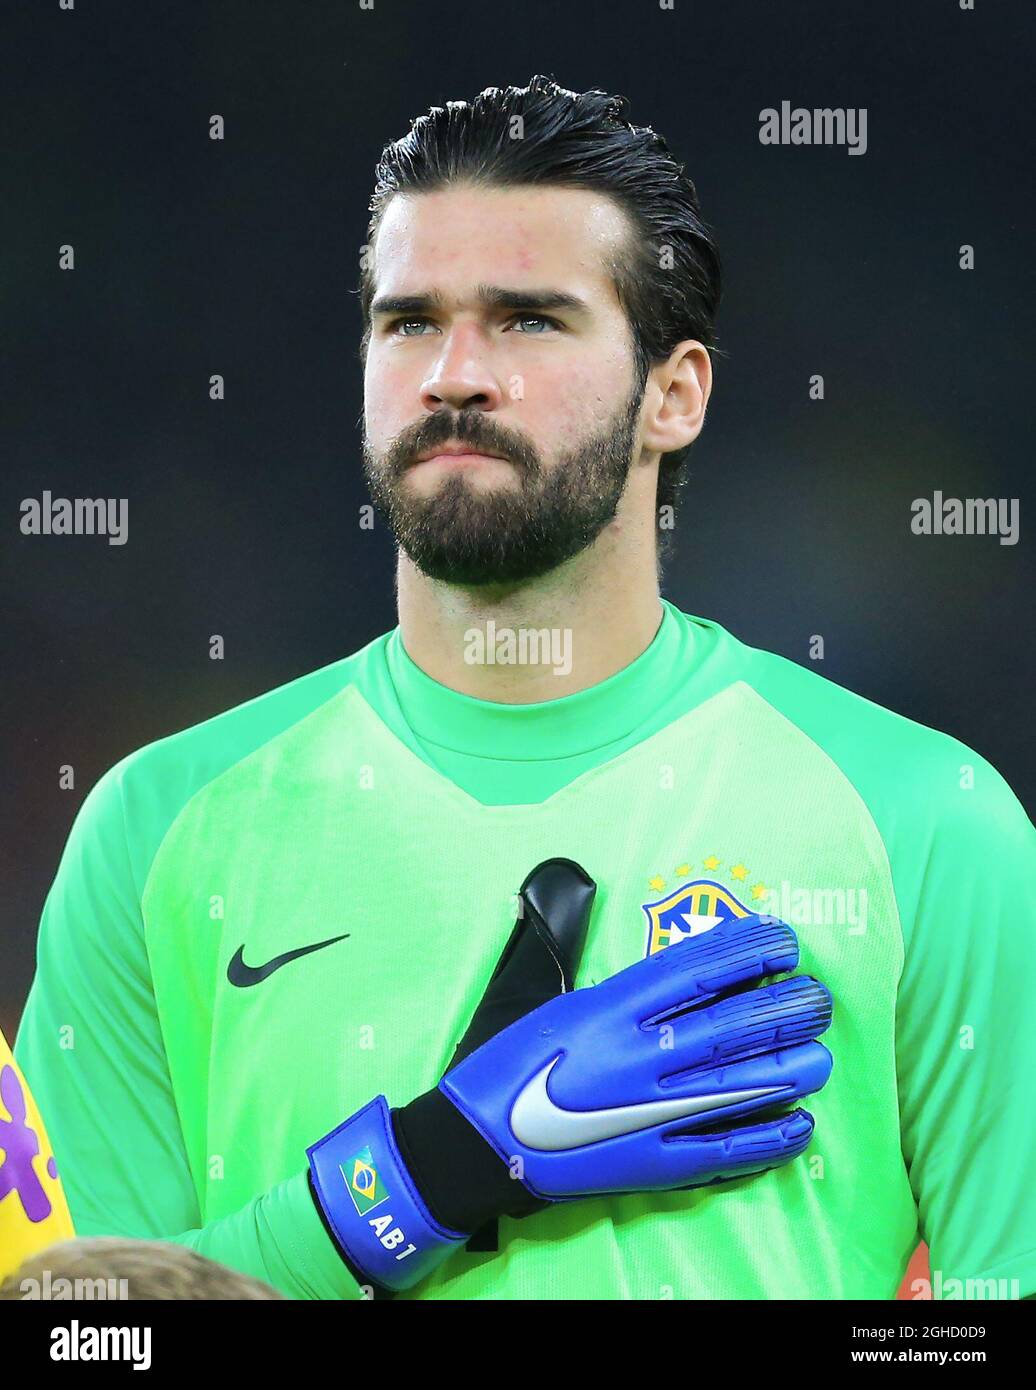 Alisson Becker Of Brazil During The International Friendly Match At The Emirates Stadium London Picture Date 16th November 2018 Picture Credit Should Read Matt Mcnulty Sportimage 2GHD0D9 